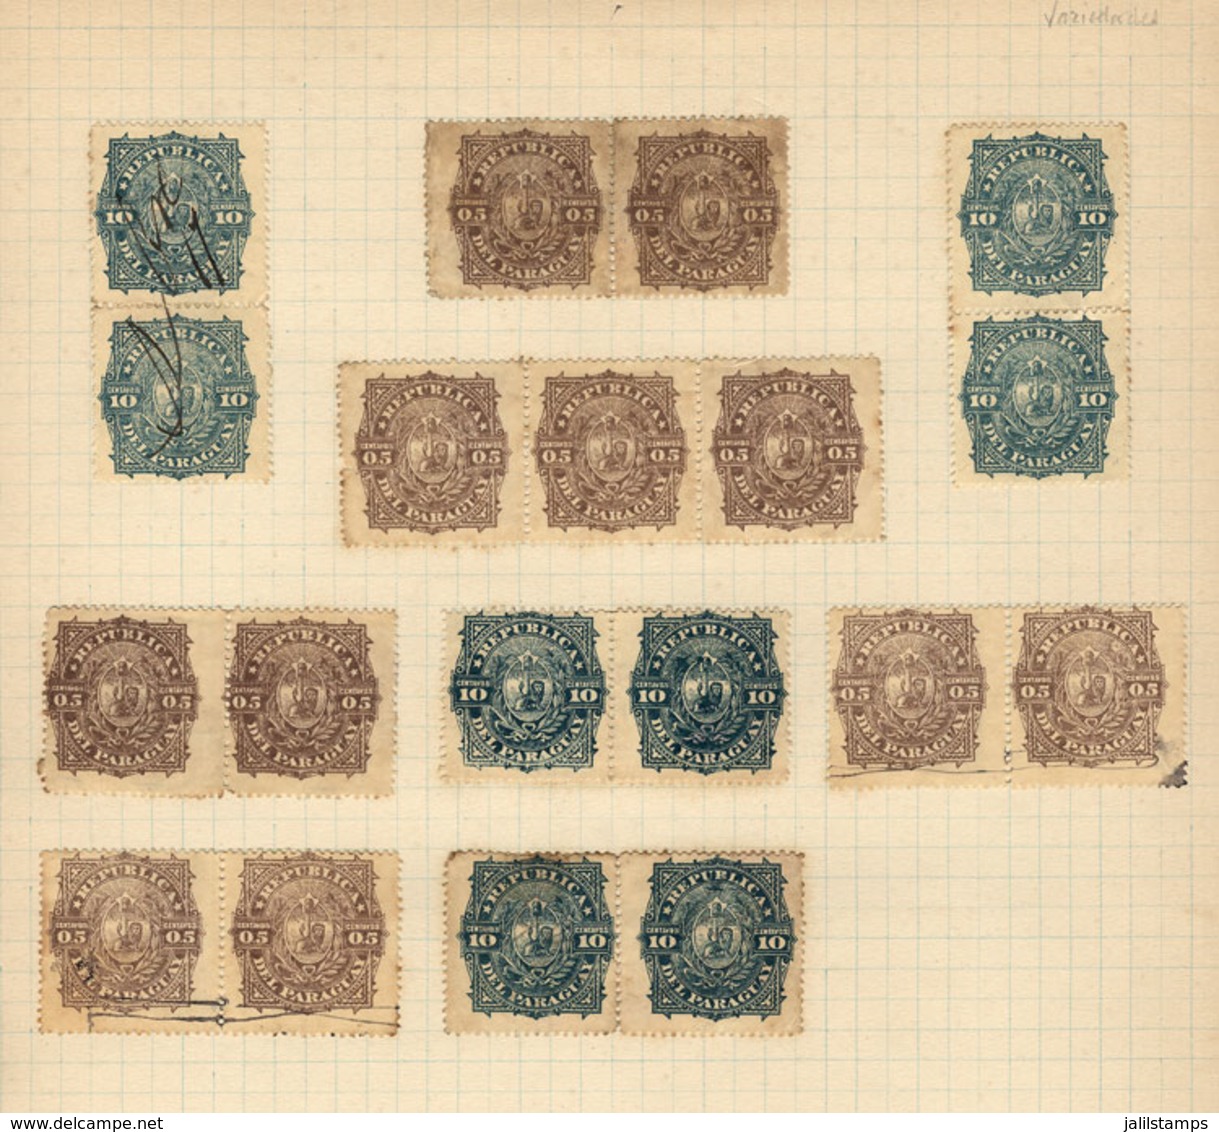 PARAGUAY: Very Old Collection In Album Pages, With 380 Stamps (including Several Large Blocks), Fine General Quality (so - Paraguay